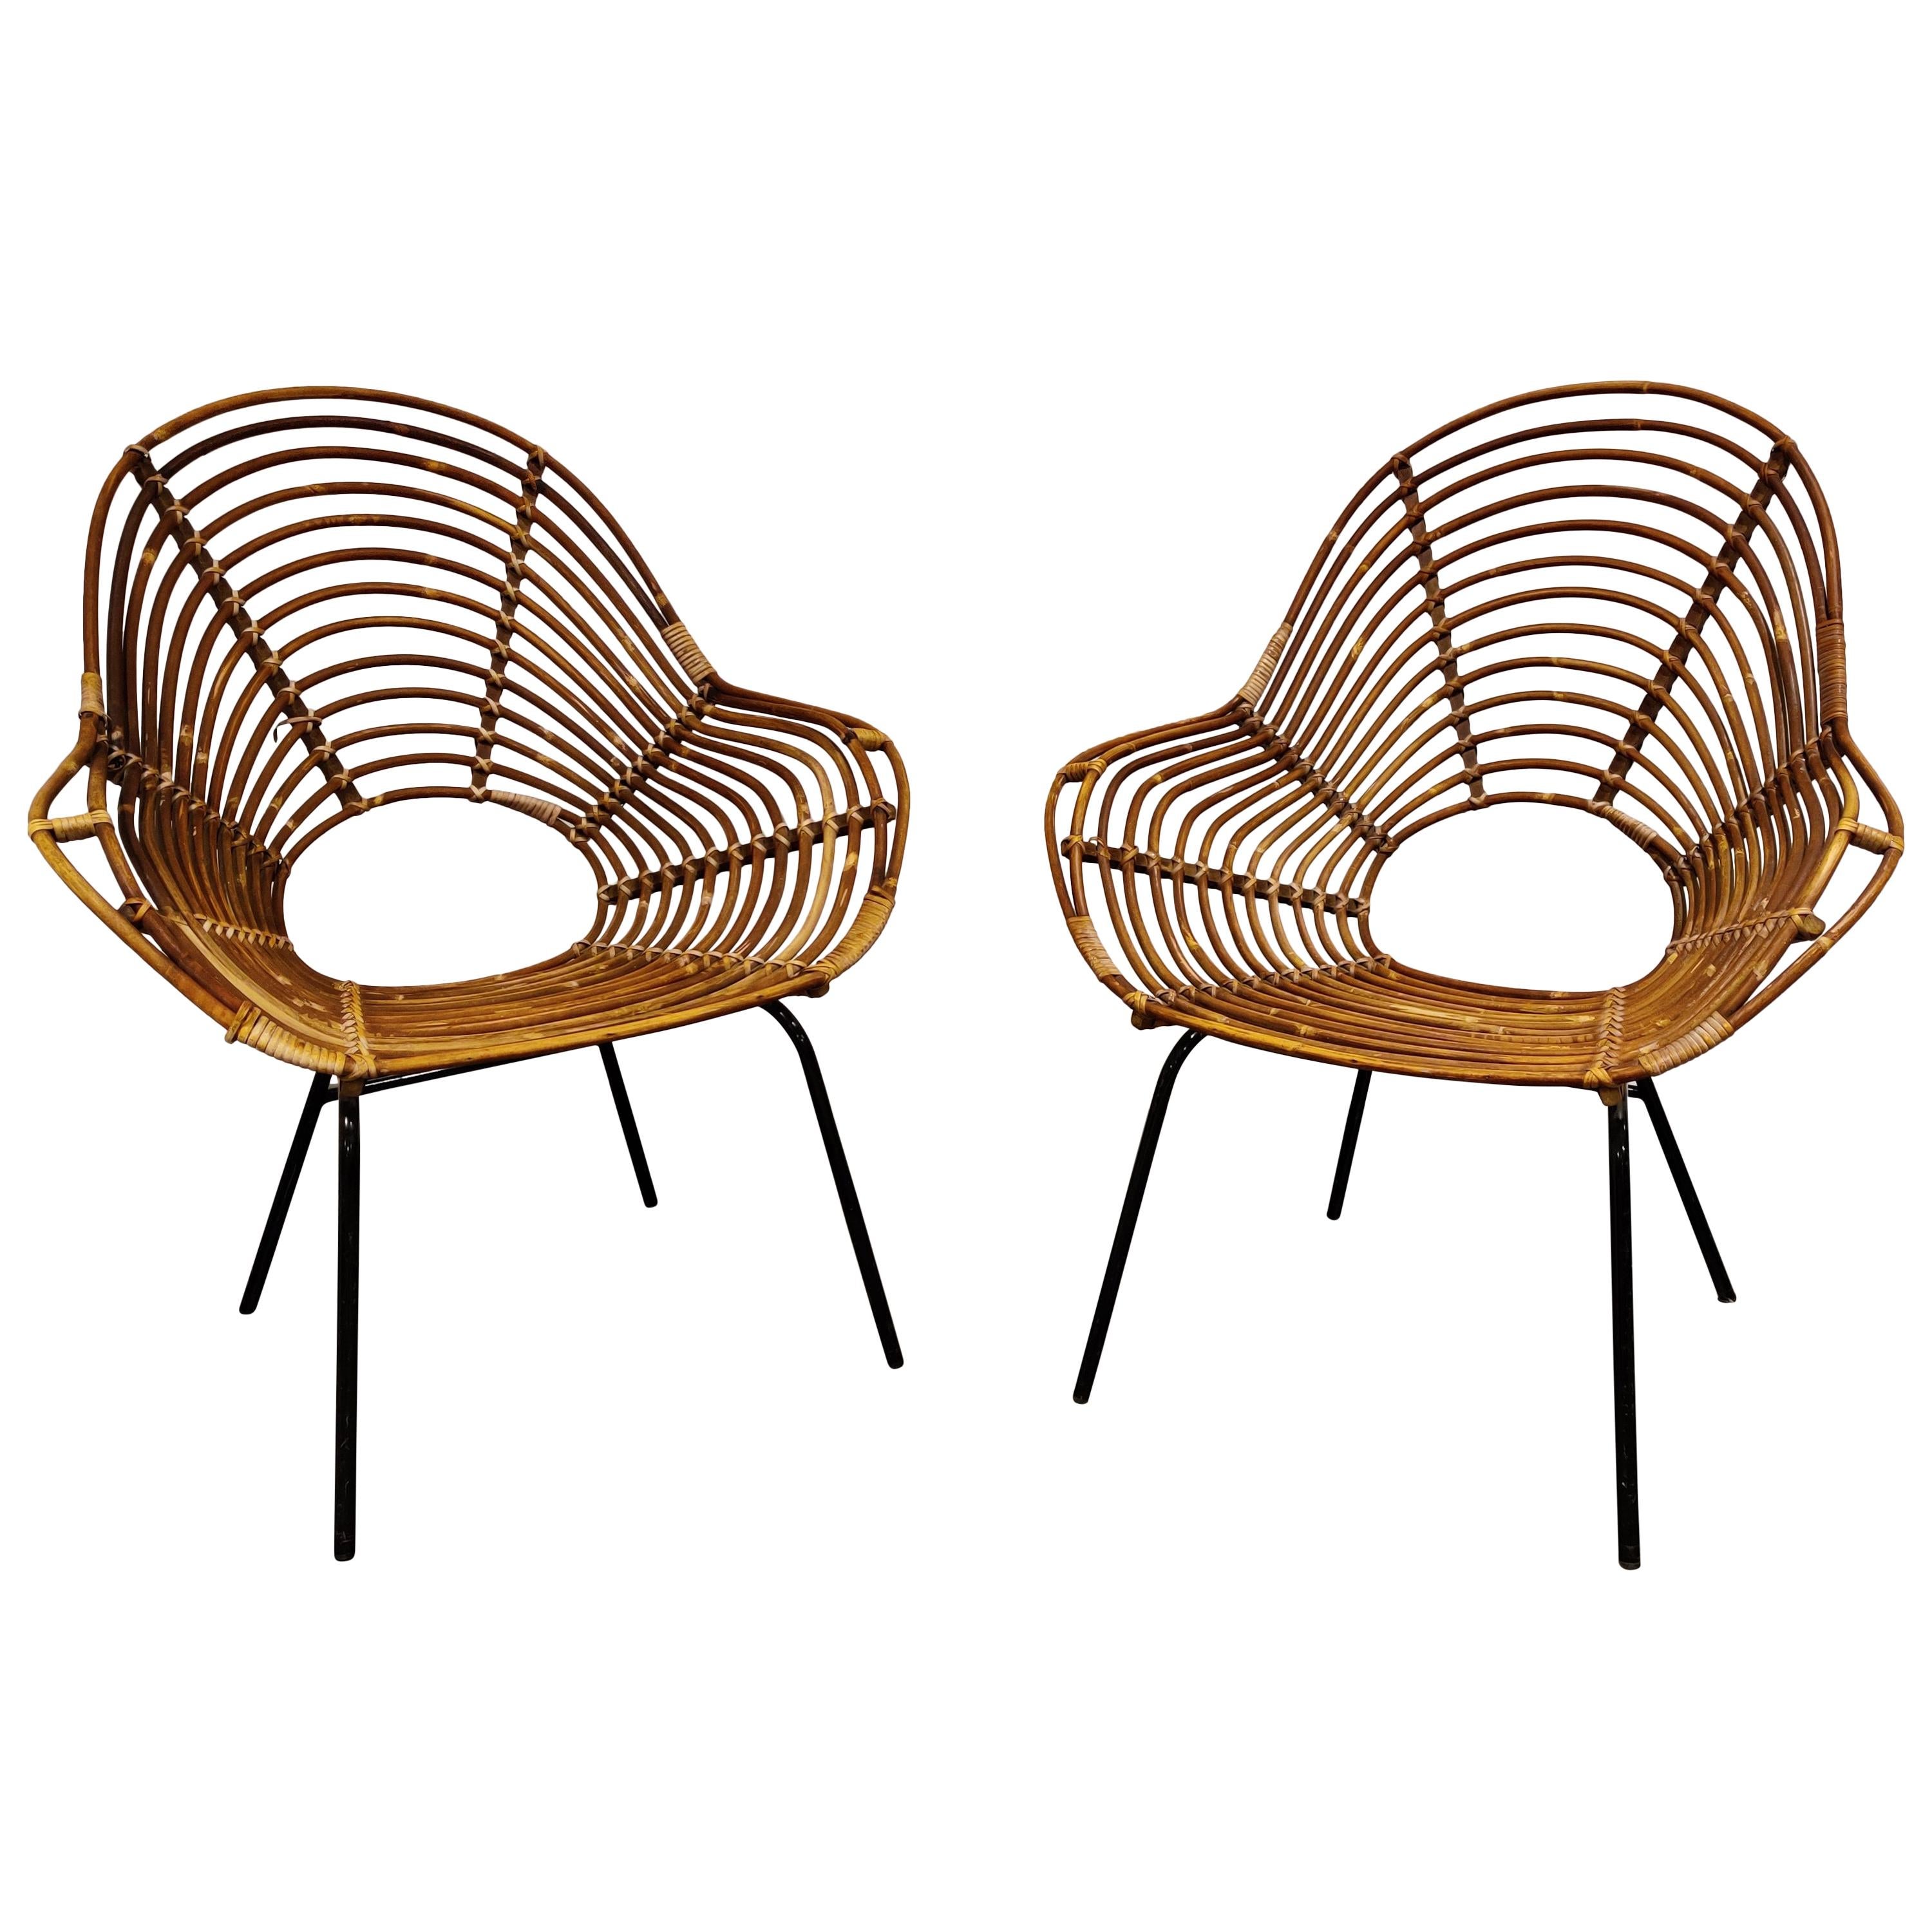 Pair of Midcentury Rattan Chairs, 1960s, Netherlands